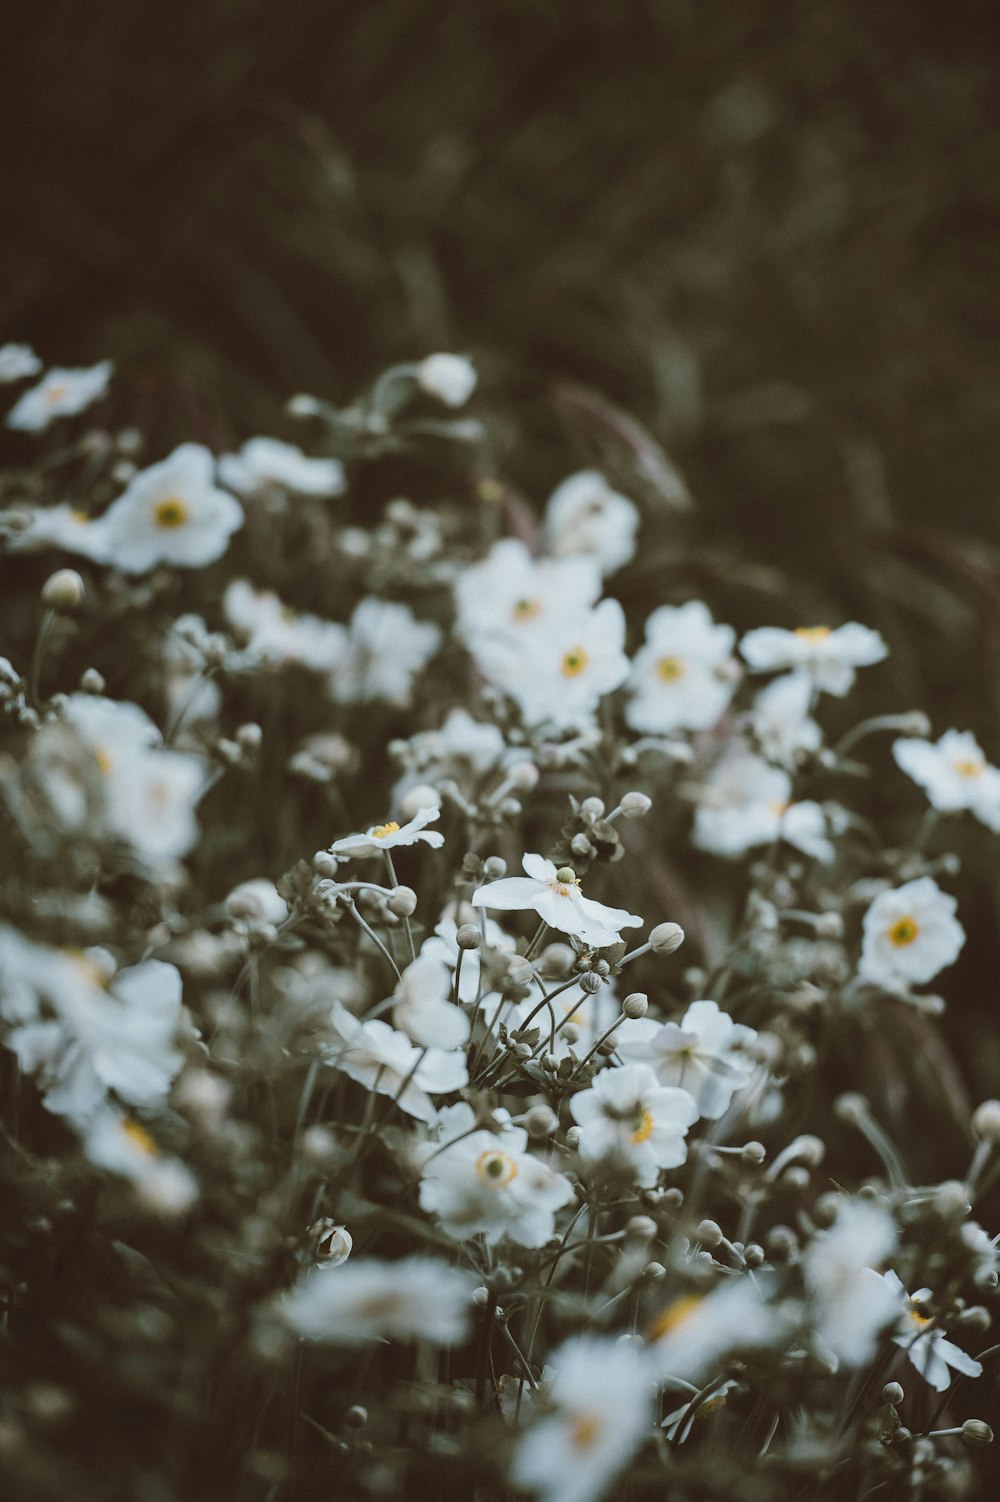 white petaled flowers in focus photography at daytime